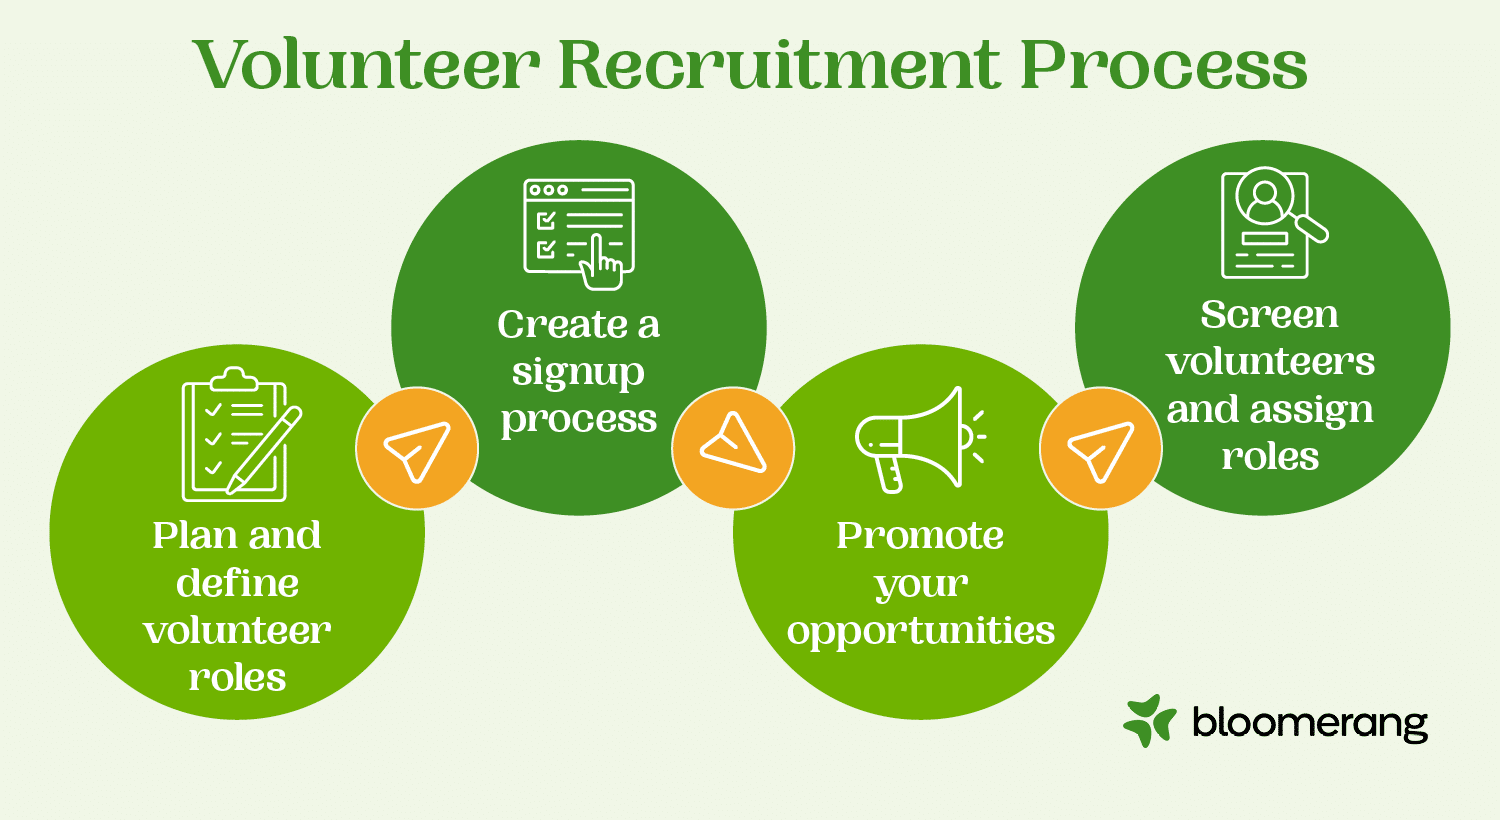 This image shows the steps of the volunteer recruitment process, which are also explained in the text below. 